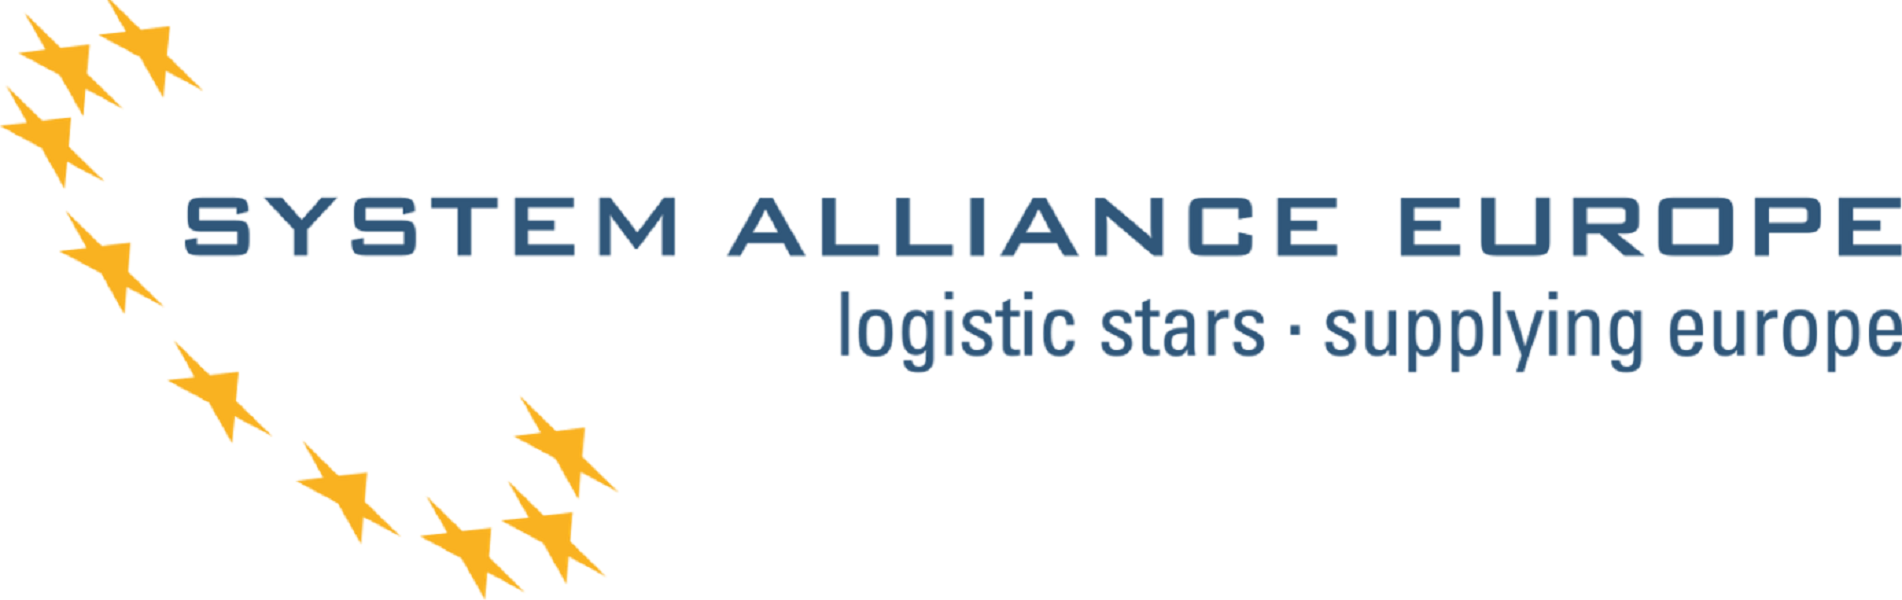 Toga Freight joins System Alliance Europe